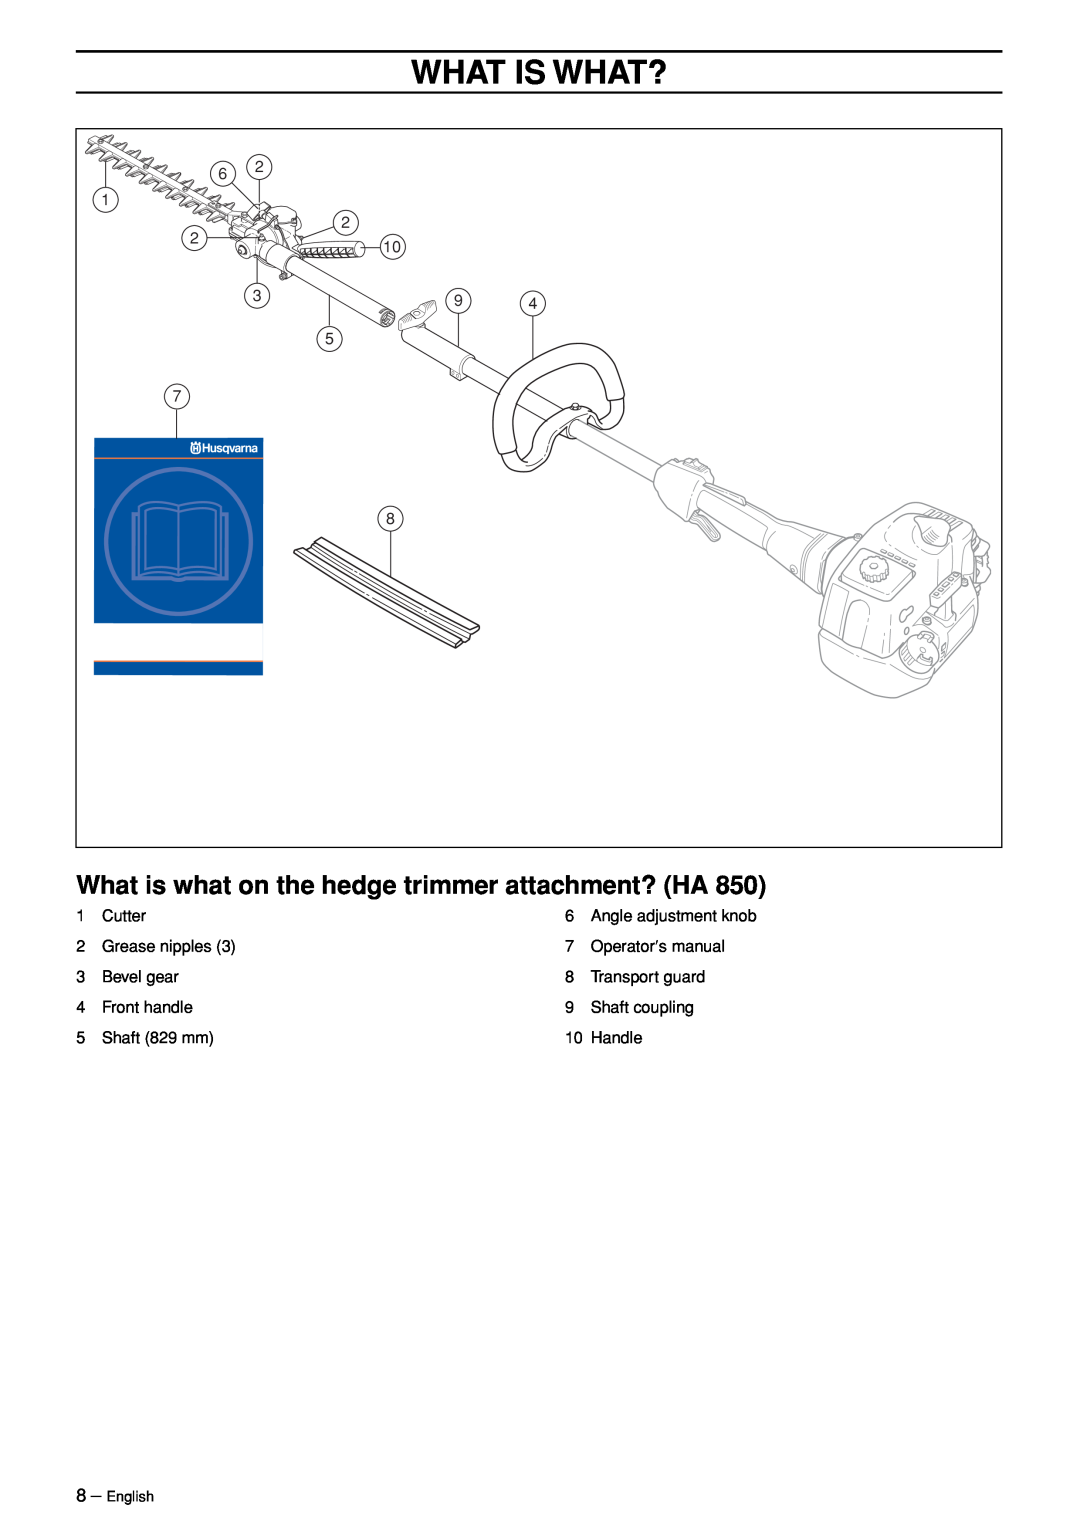 Husqvarna HA 110, HA 110 manual What Is What?, What is what on the hedge trimmer attachment? HA, Cutter 